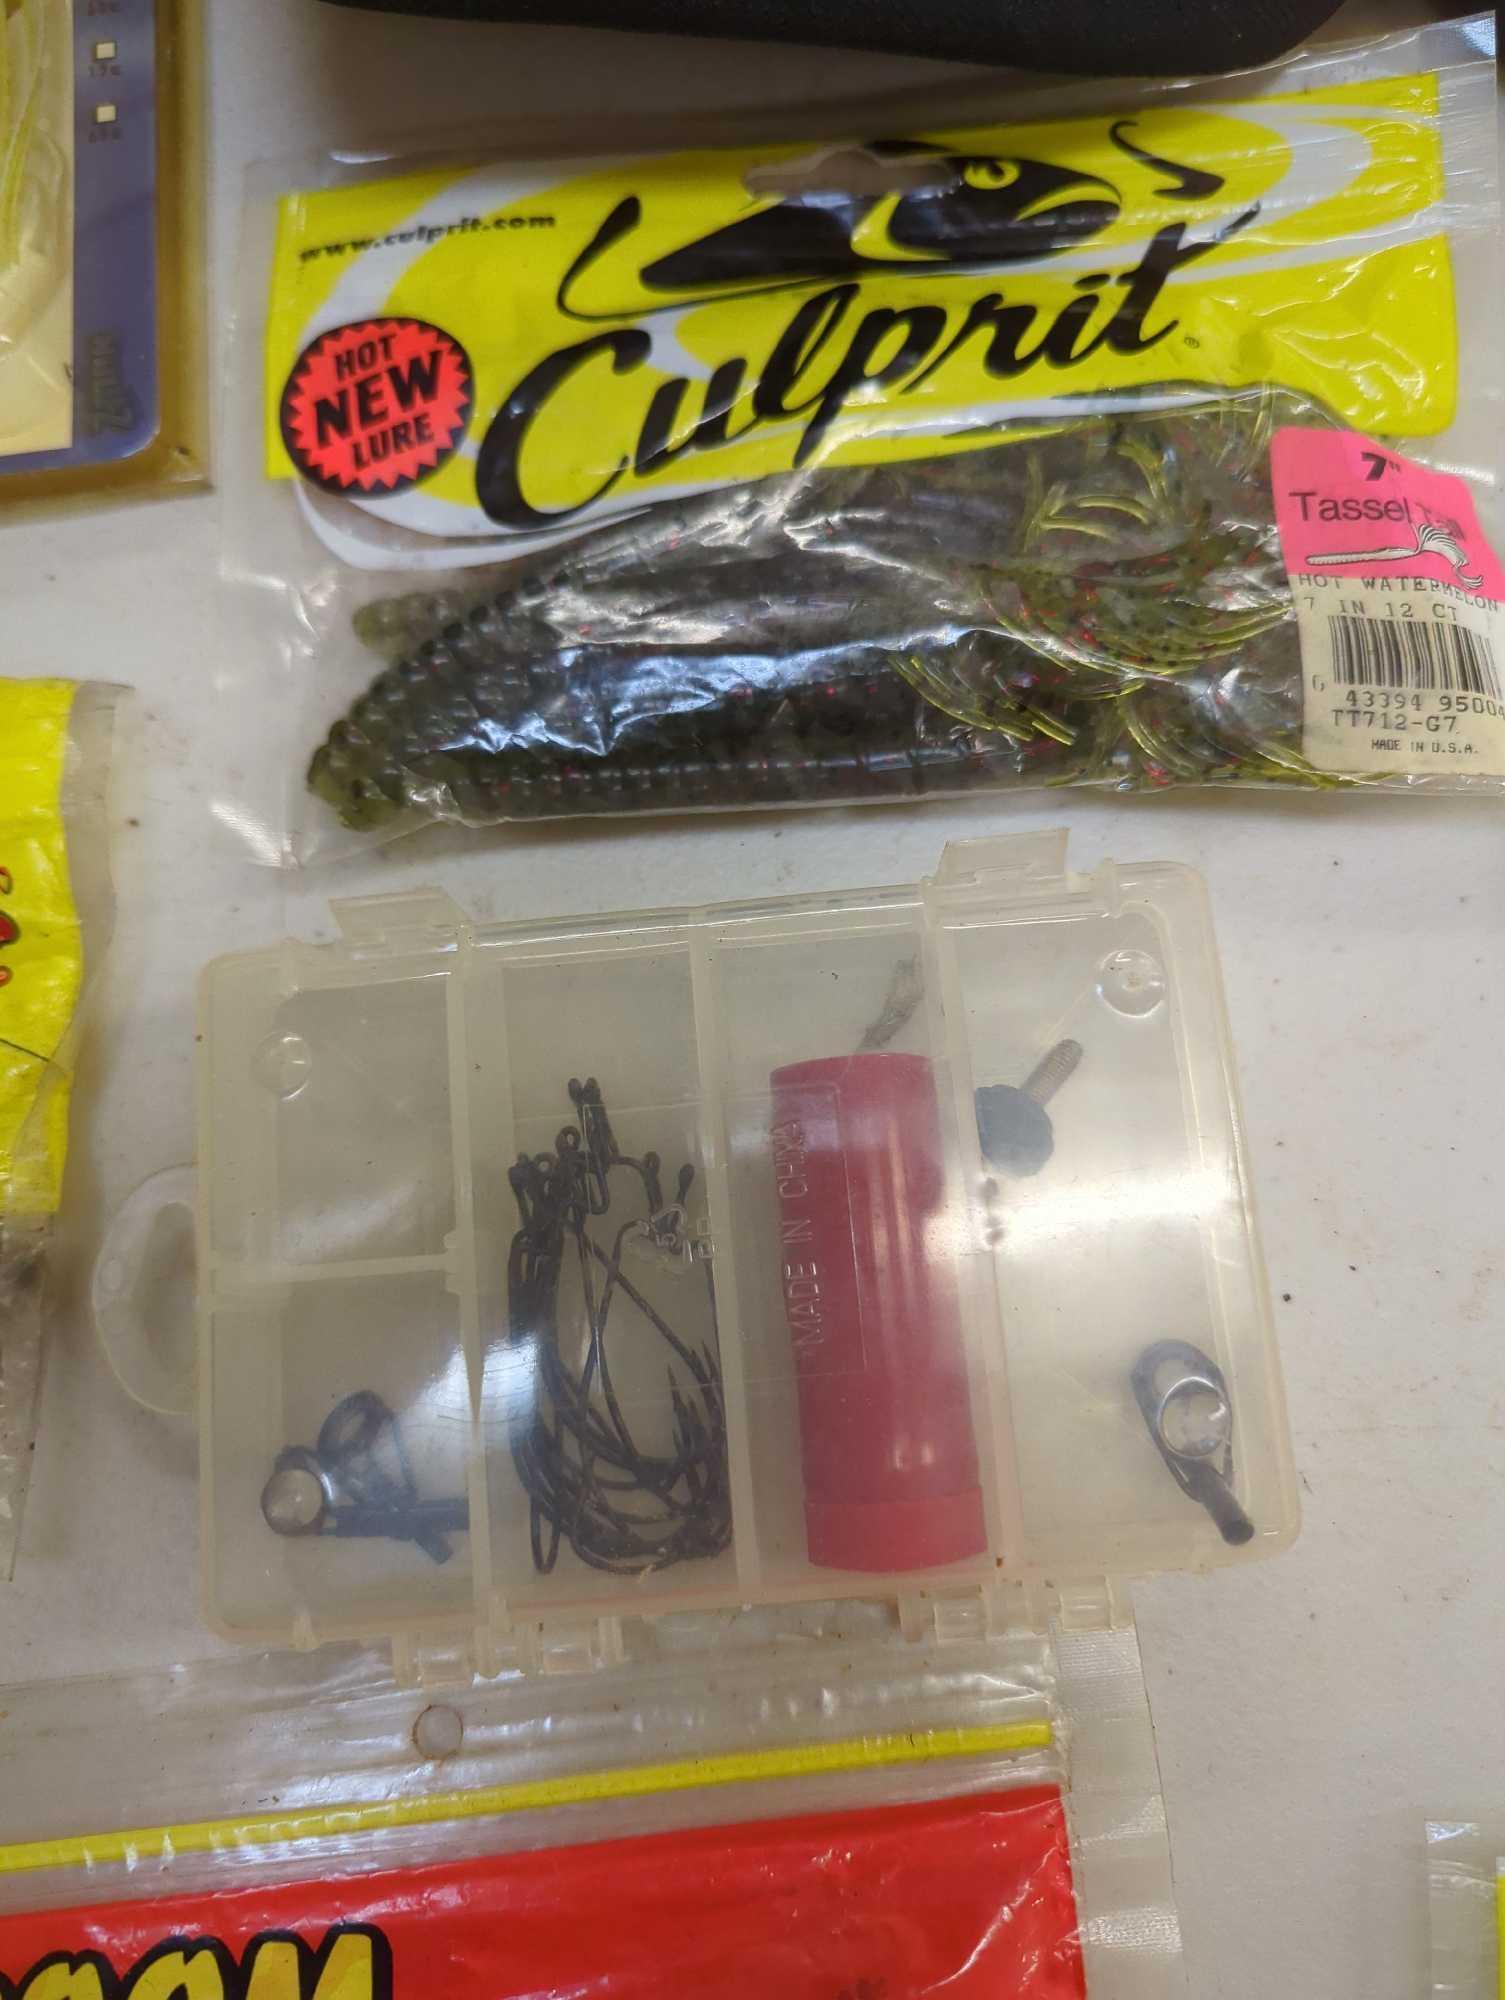 Refrigerator drawer filled with fishing lures and other fishing accessories. Comes as is shown in